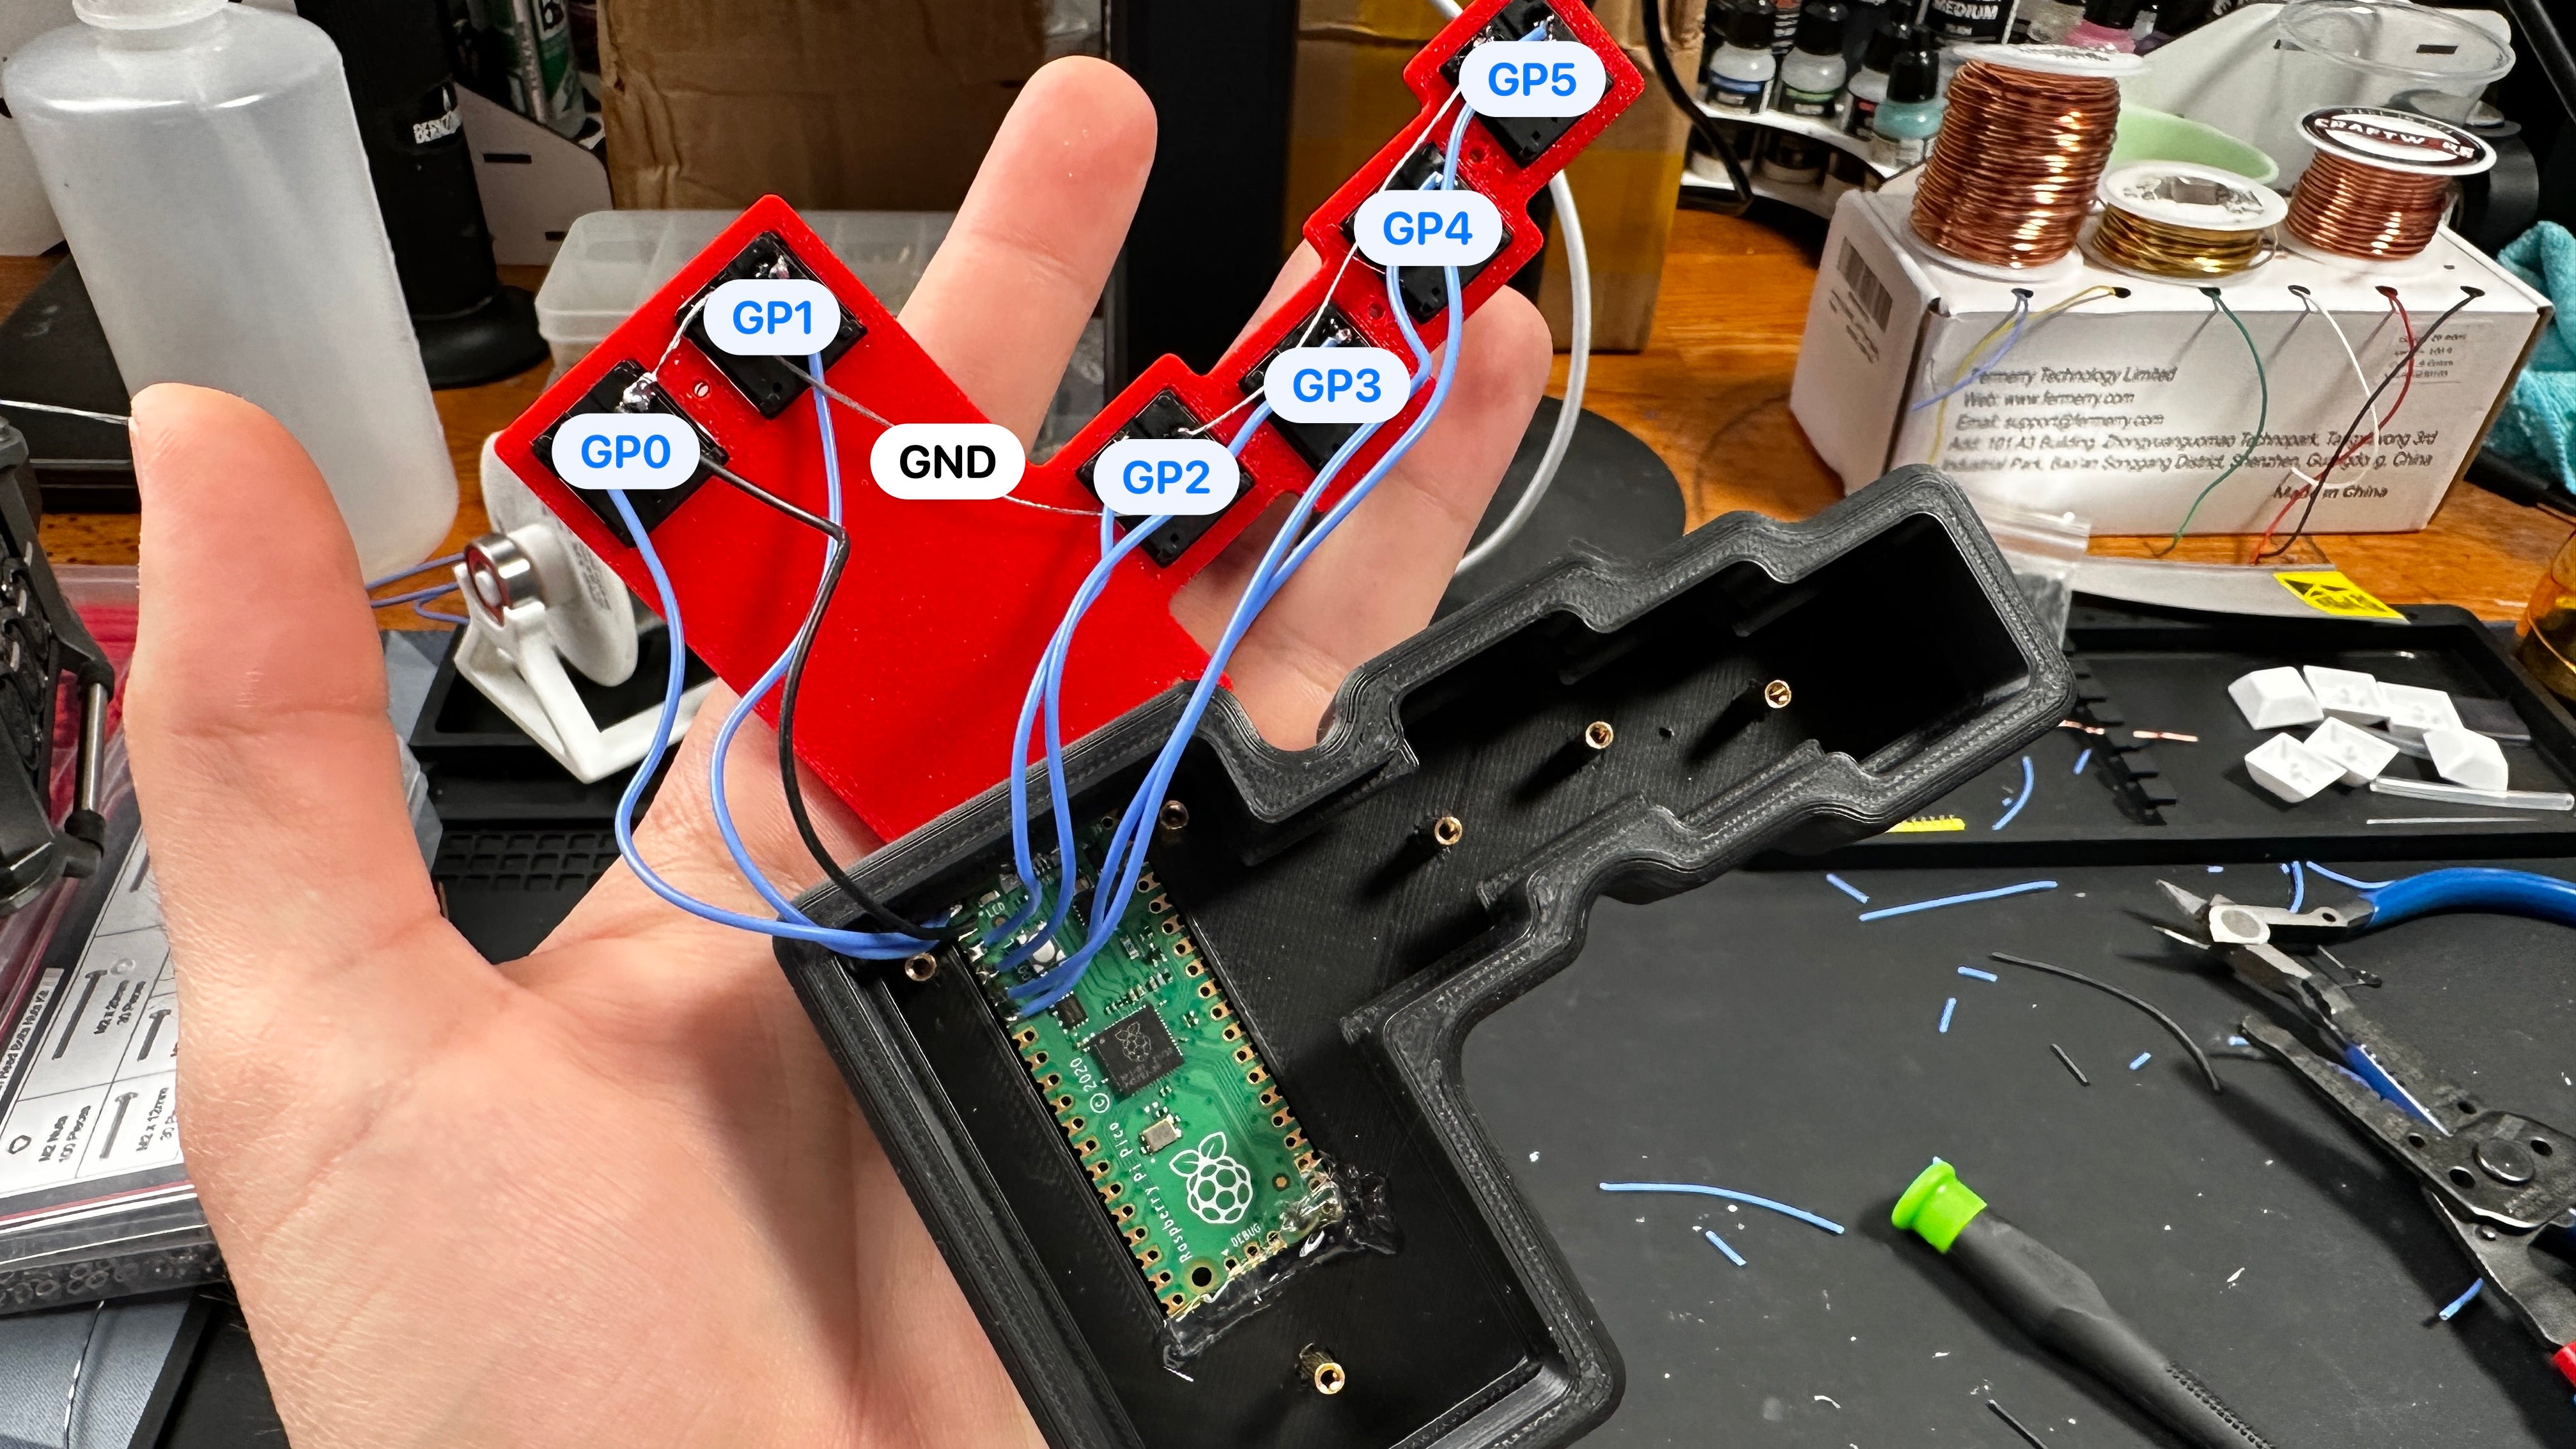 Annotated ScottoMouse wiring.